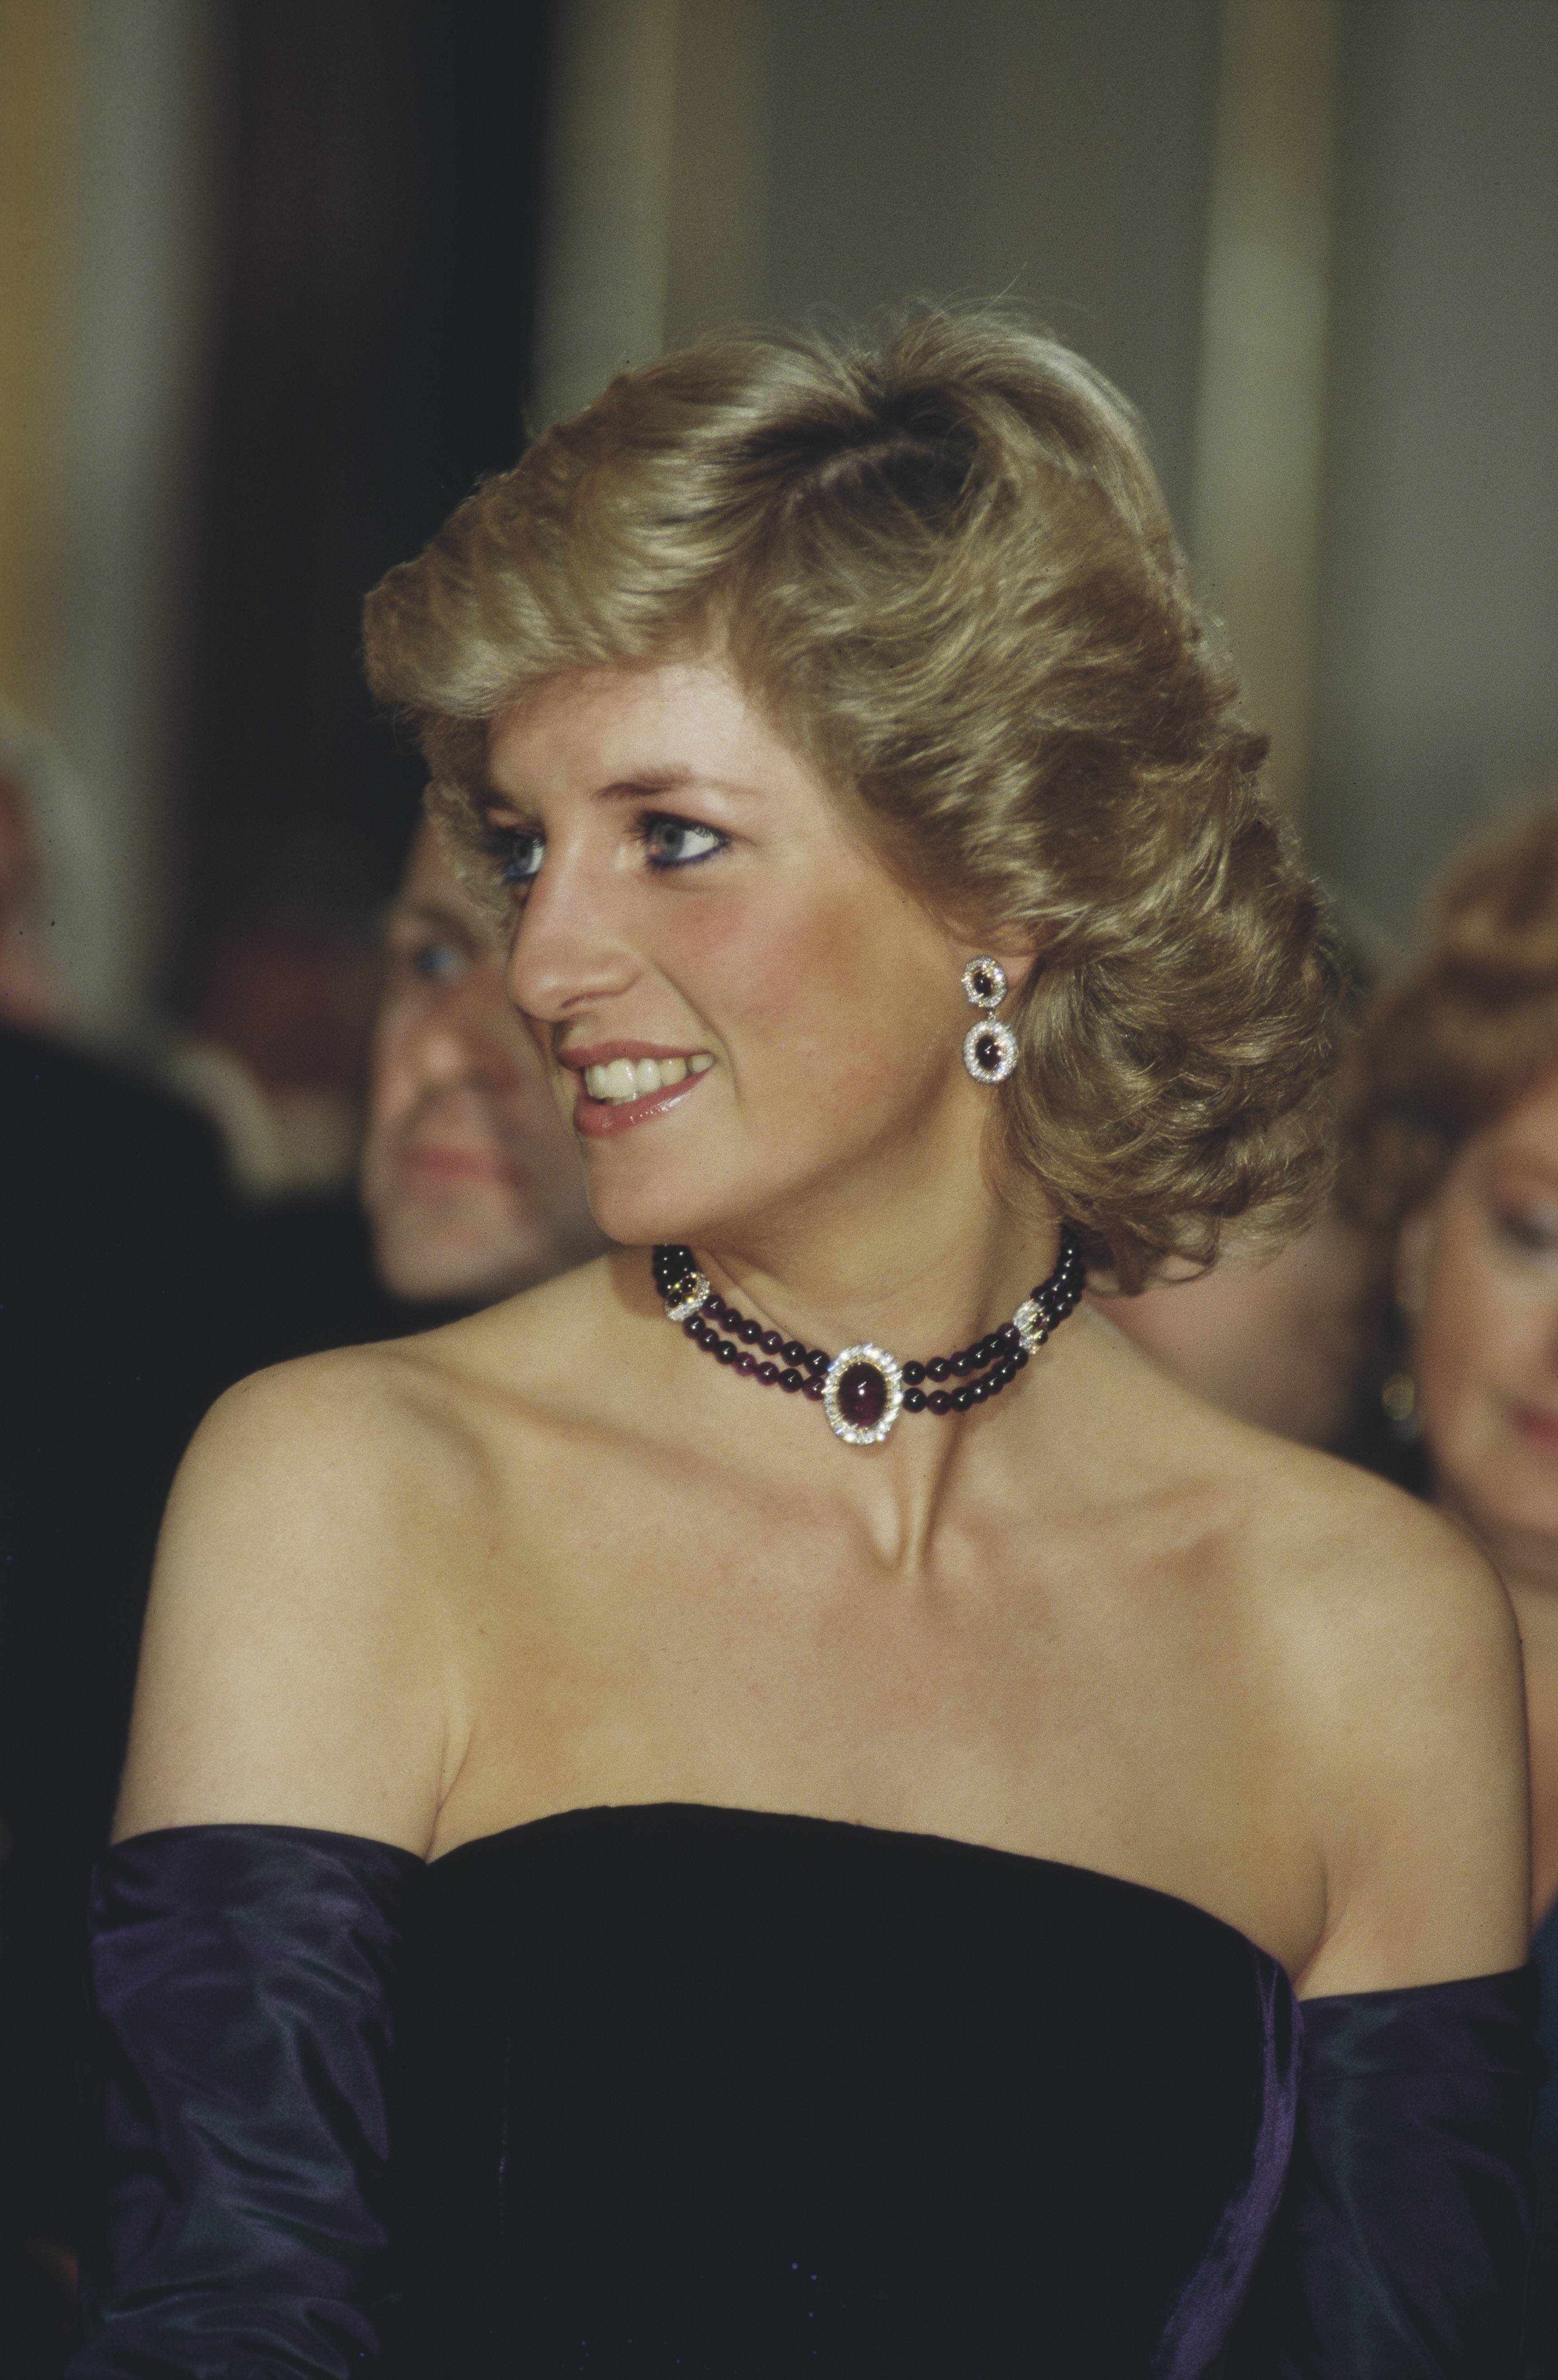 Diana, Princess of Wales  (1961 - 1997) attends the opera in Munich, Germany, wearing a purple strapless gown by Catherine Walker, November 1987.  (Photo by Jayne Fincher/Princess Diana Archive/Getty Images) (Foto: Getty Images)